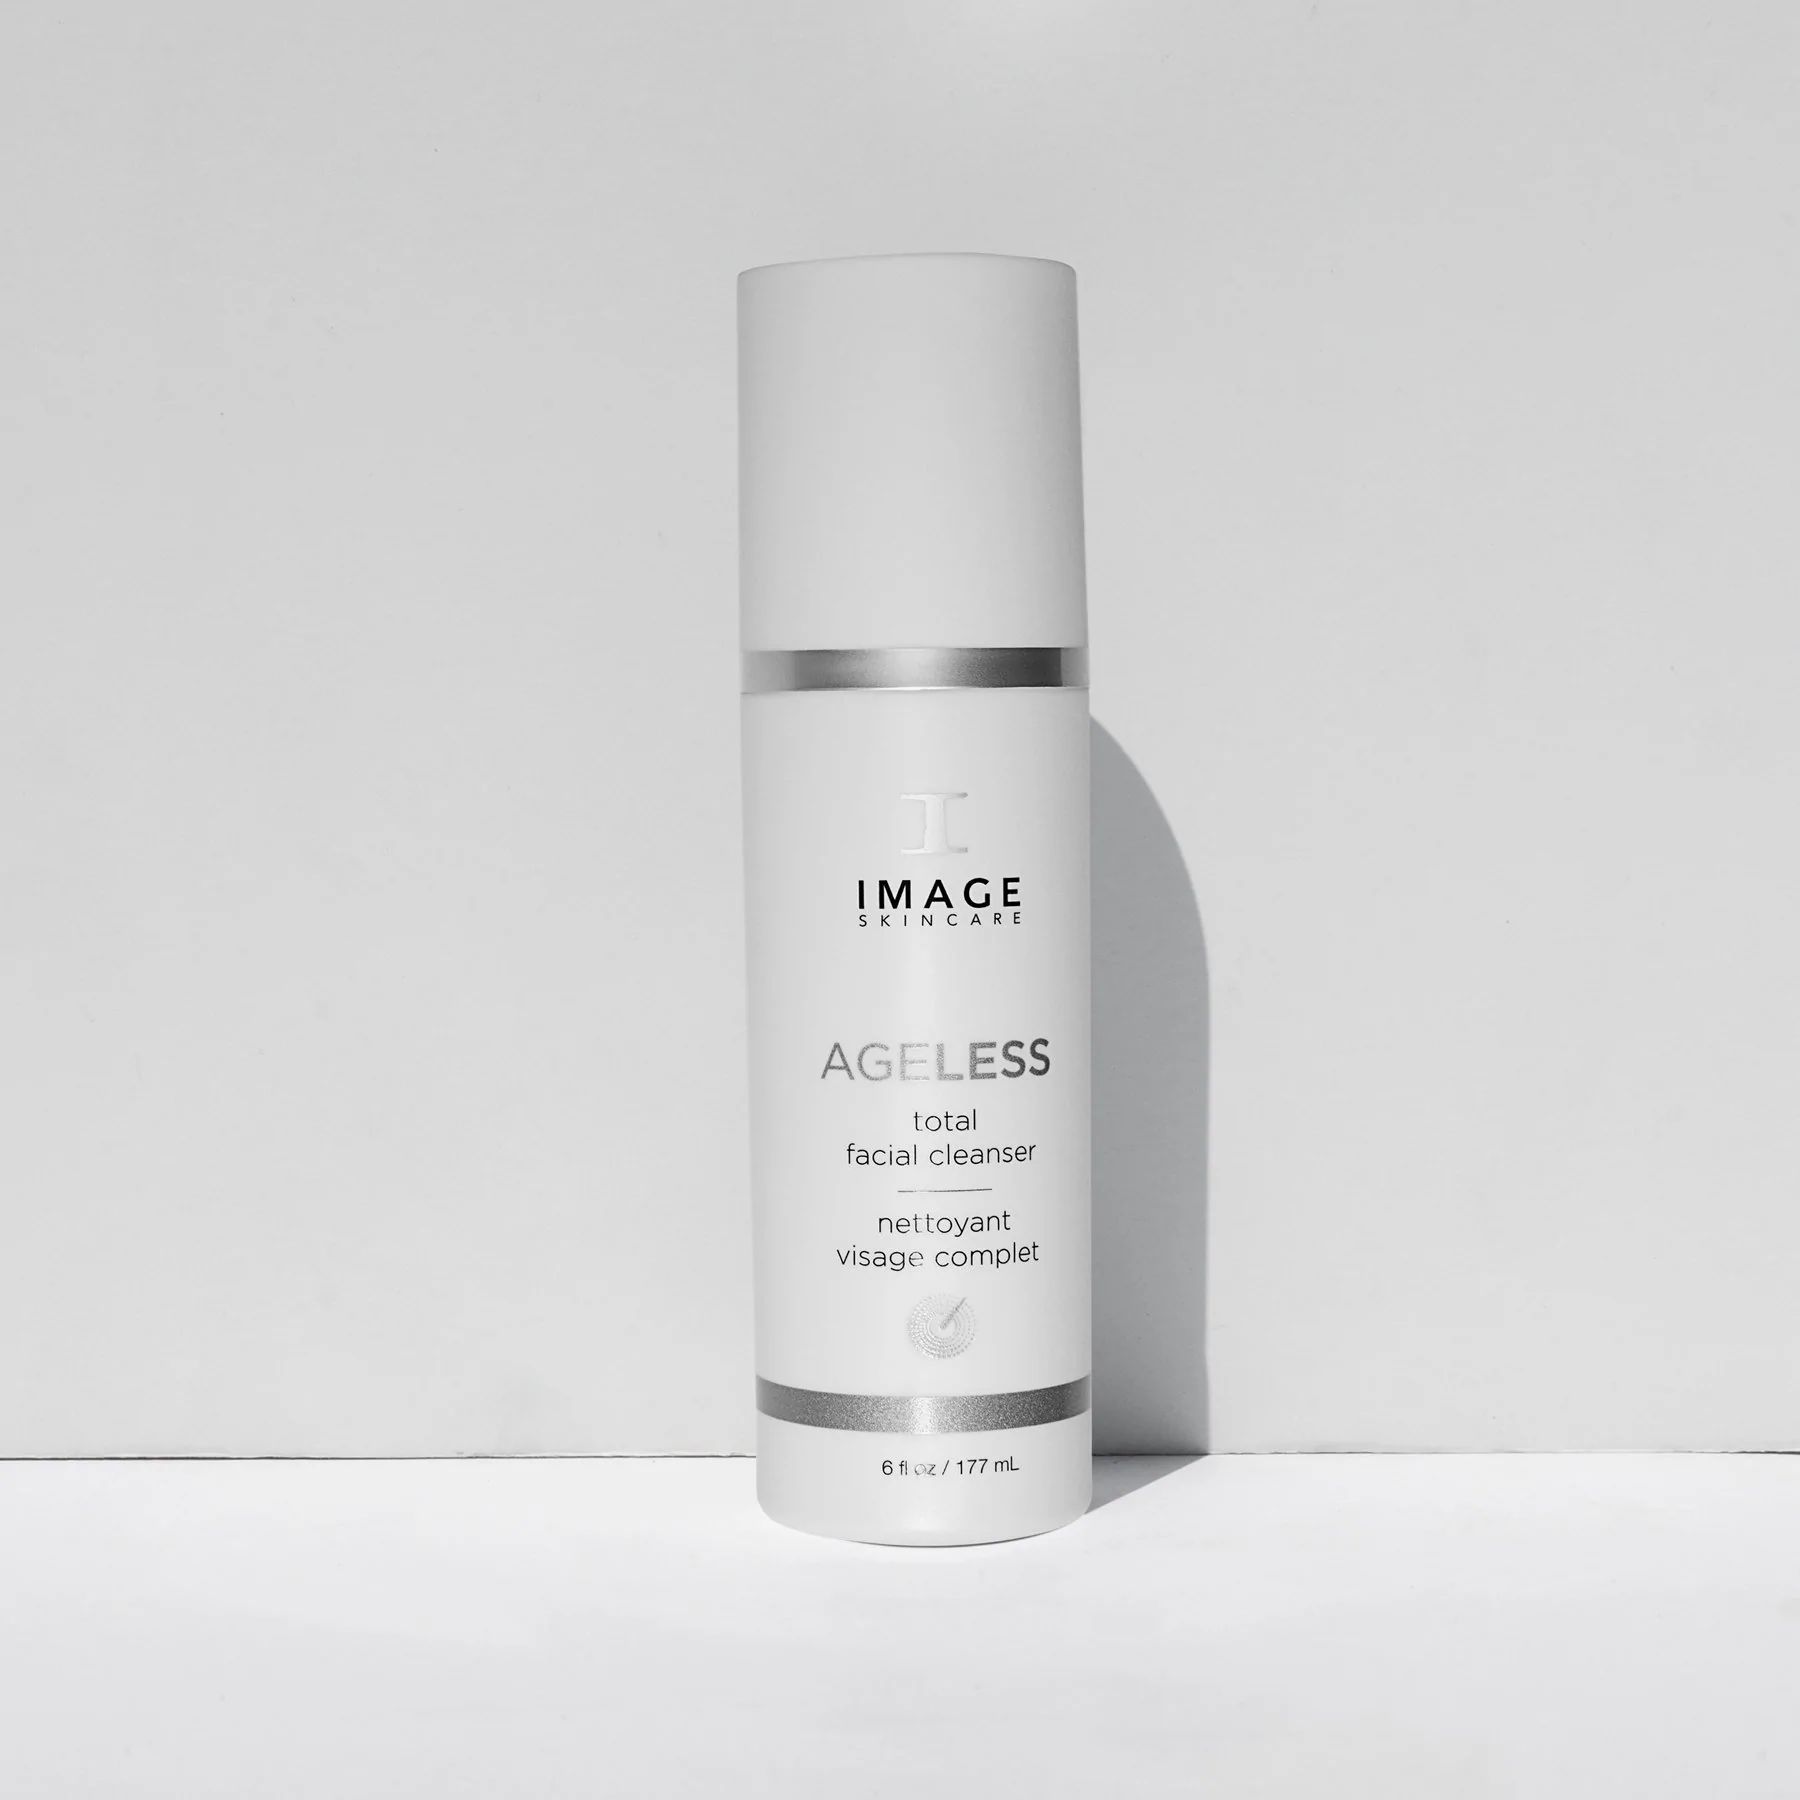 AGELESS total facial cleanser | Image Skincare